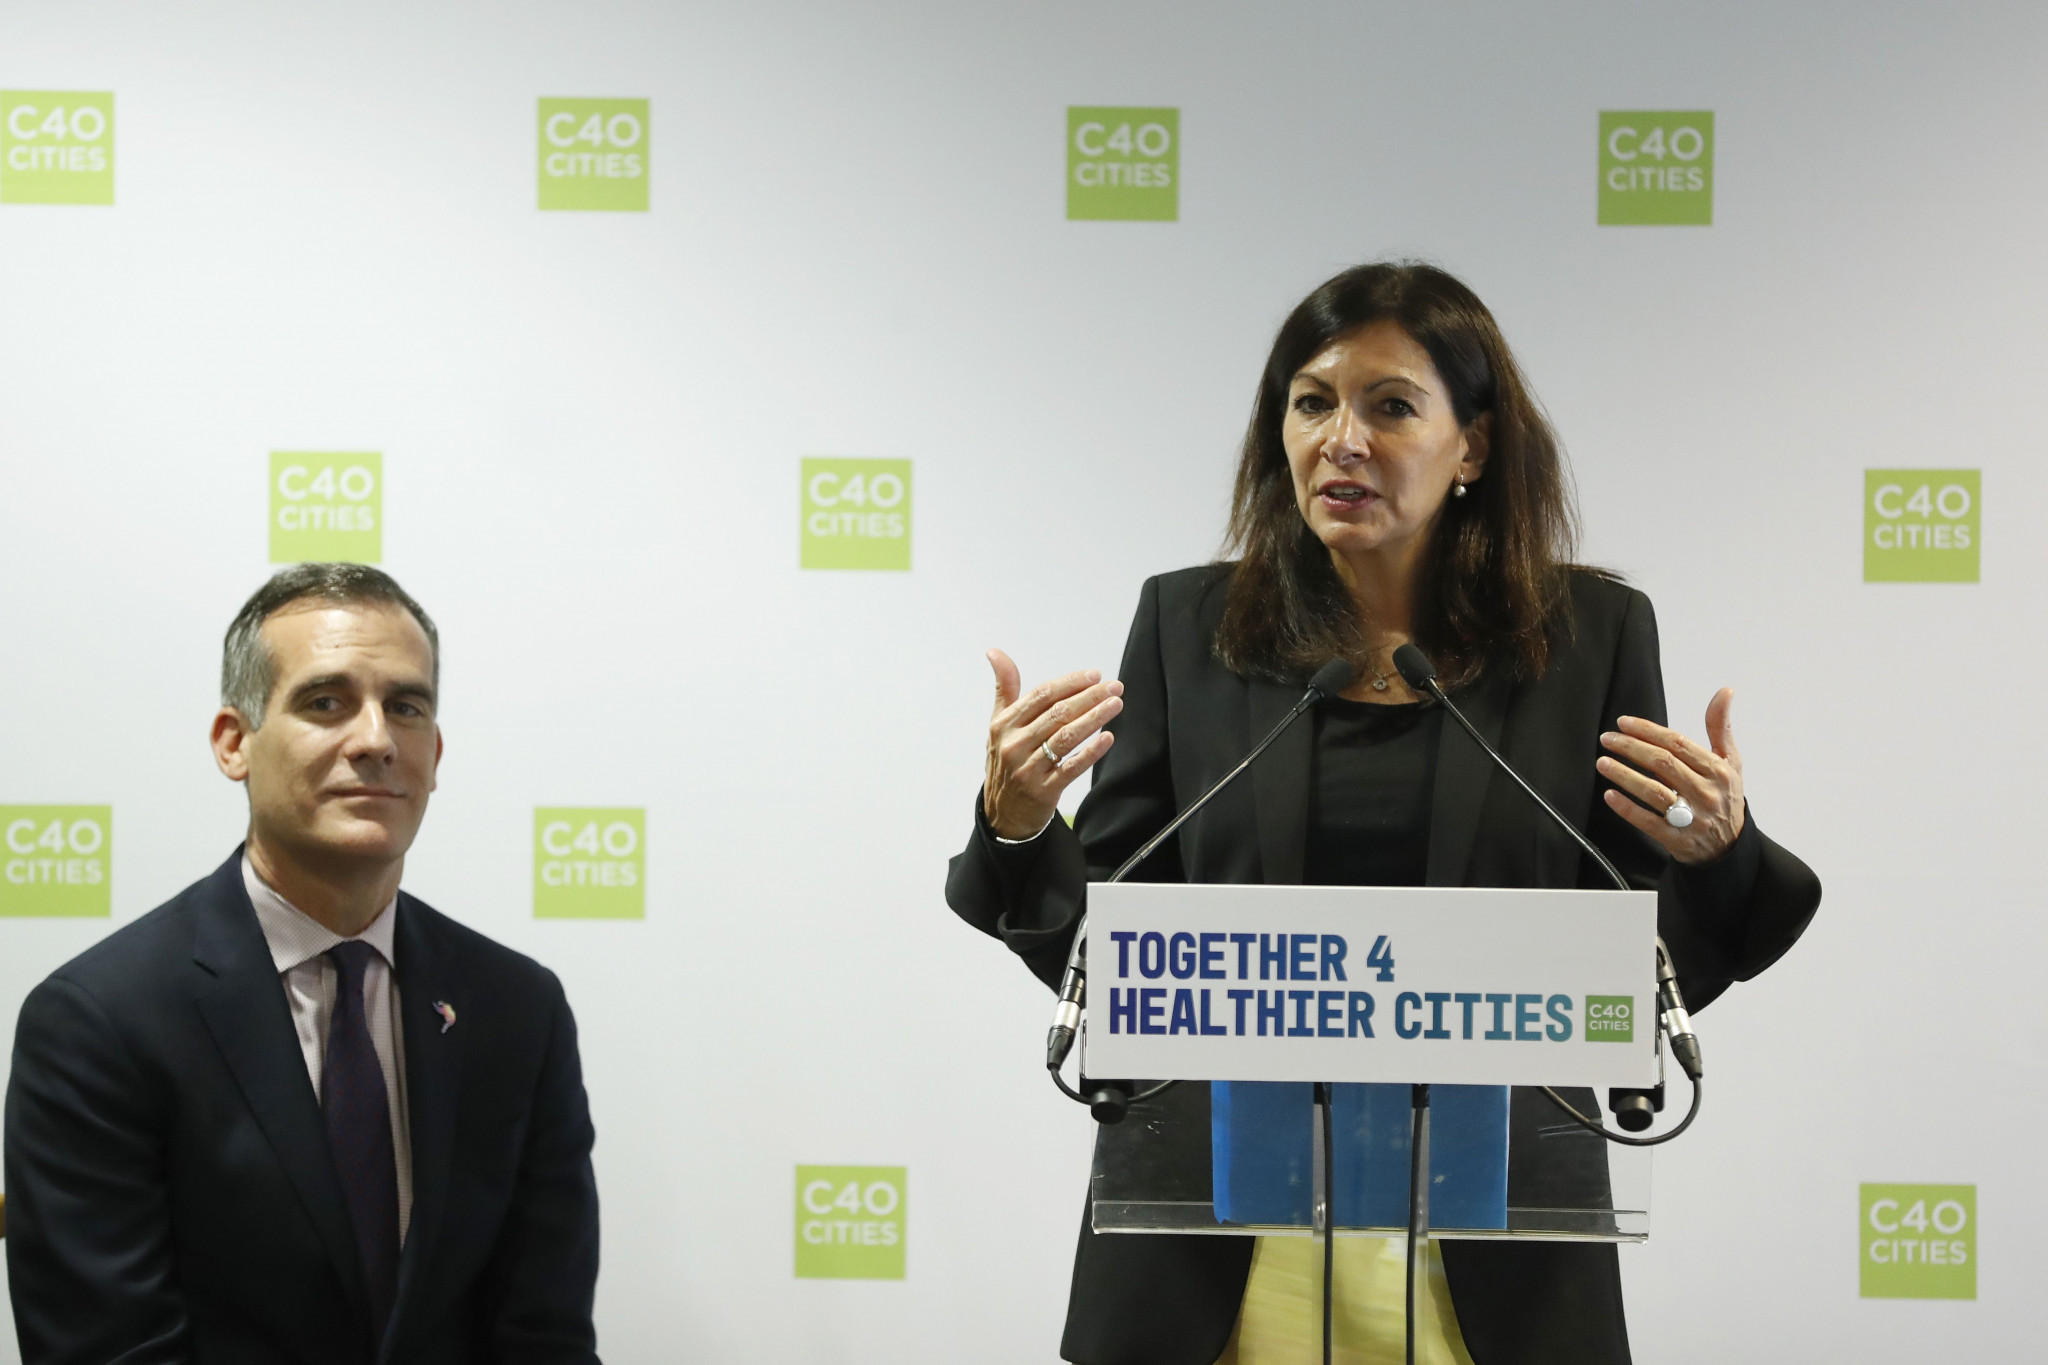 Paris and Los Angeles Mayors express hope to make Olympic Games more sustainable at climate event